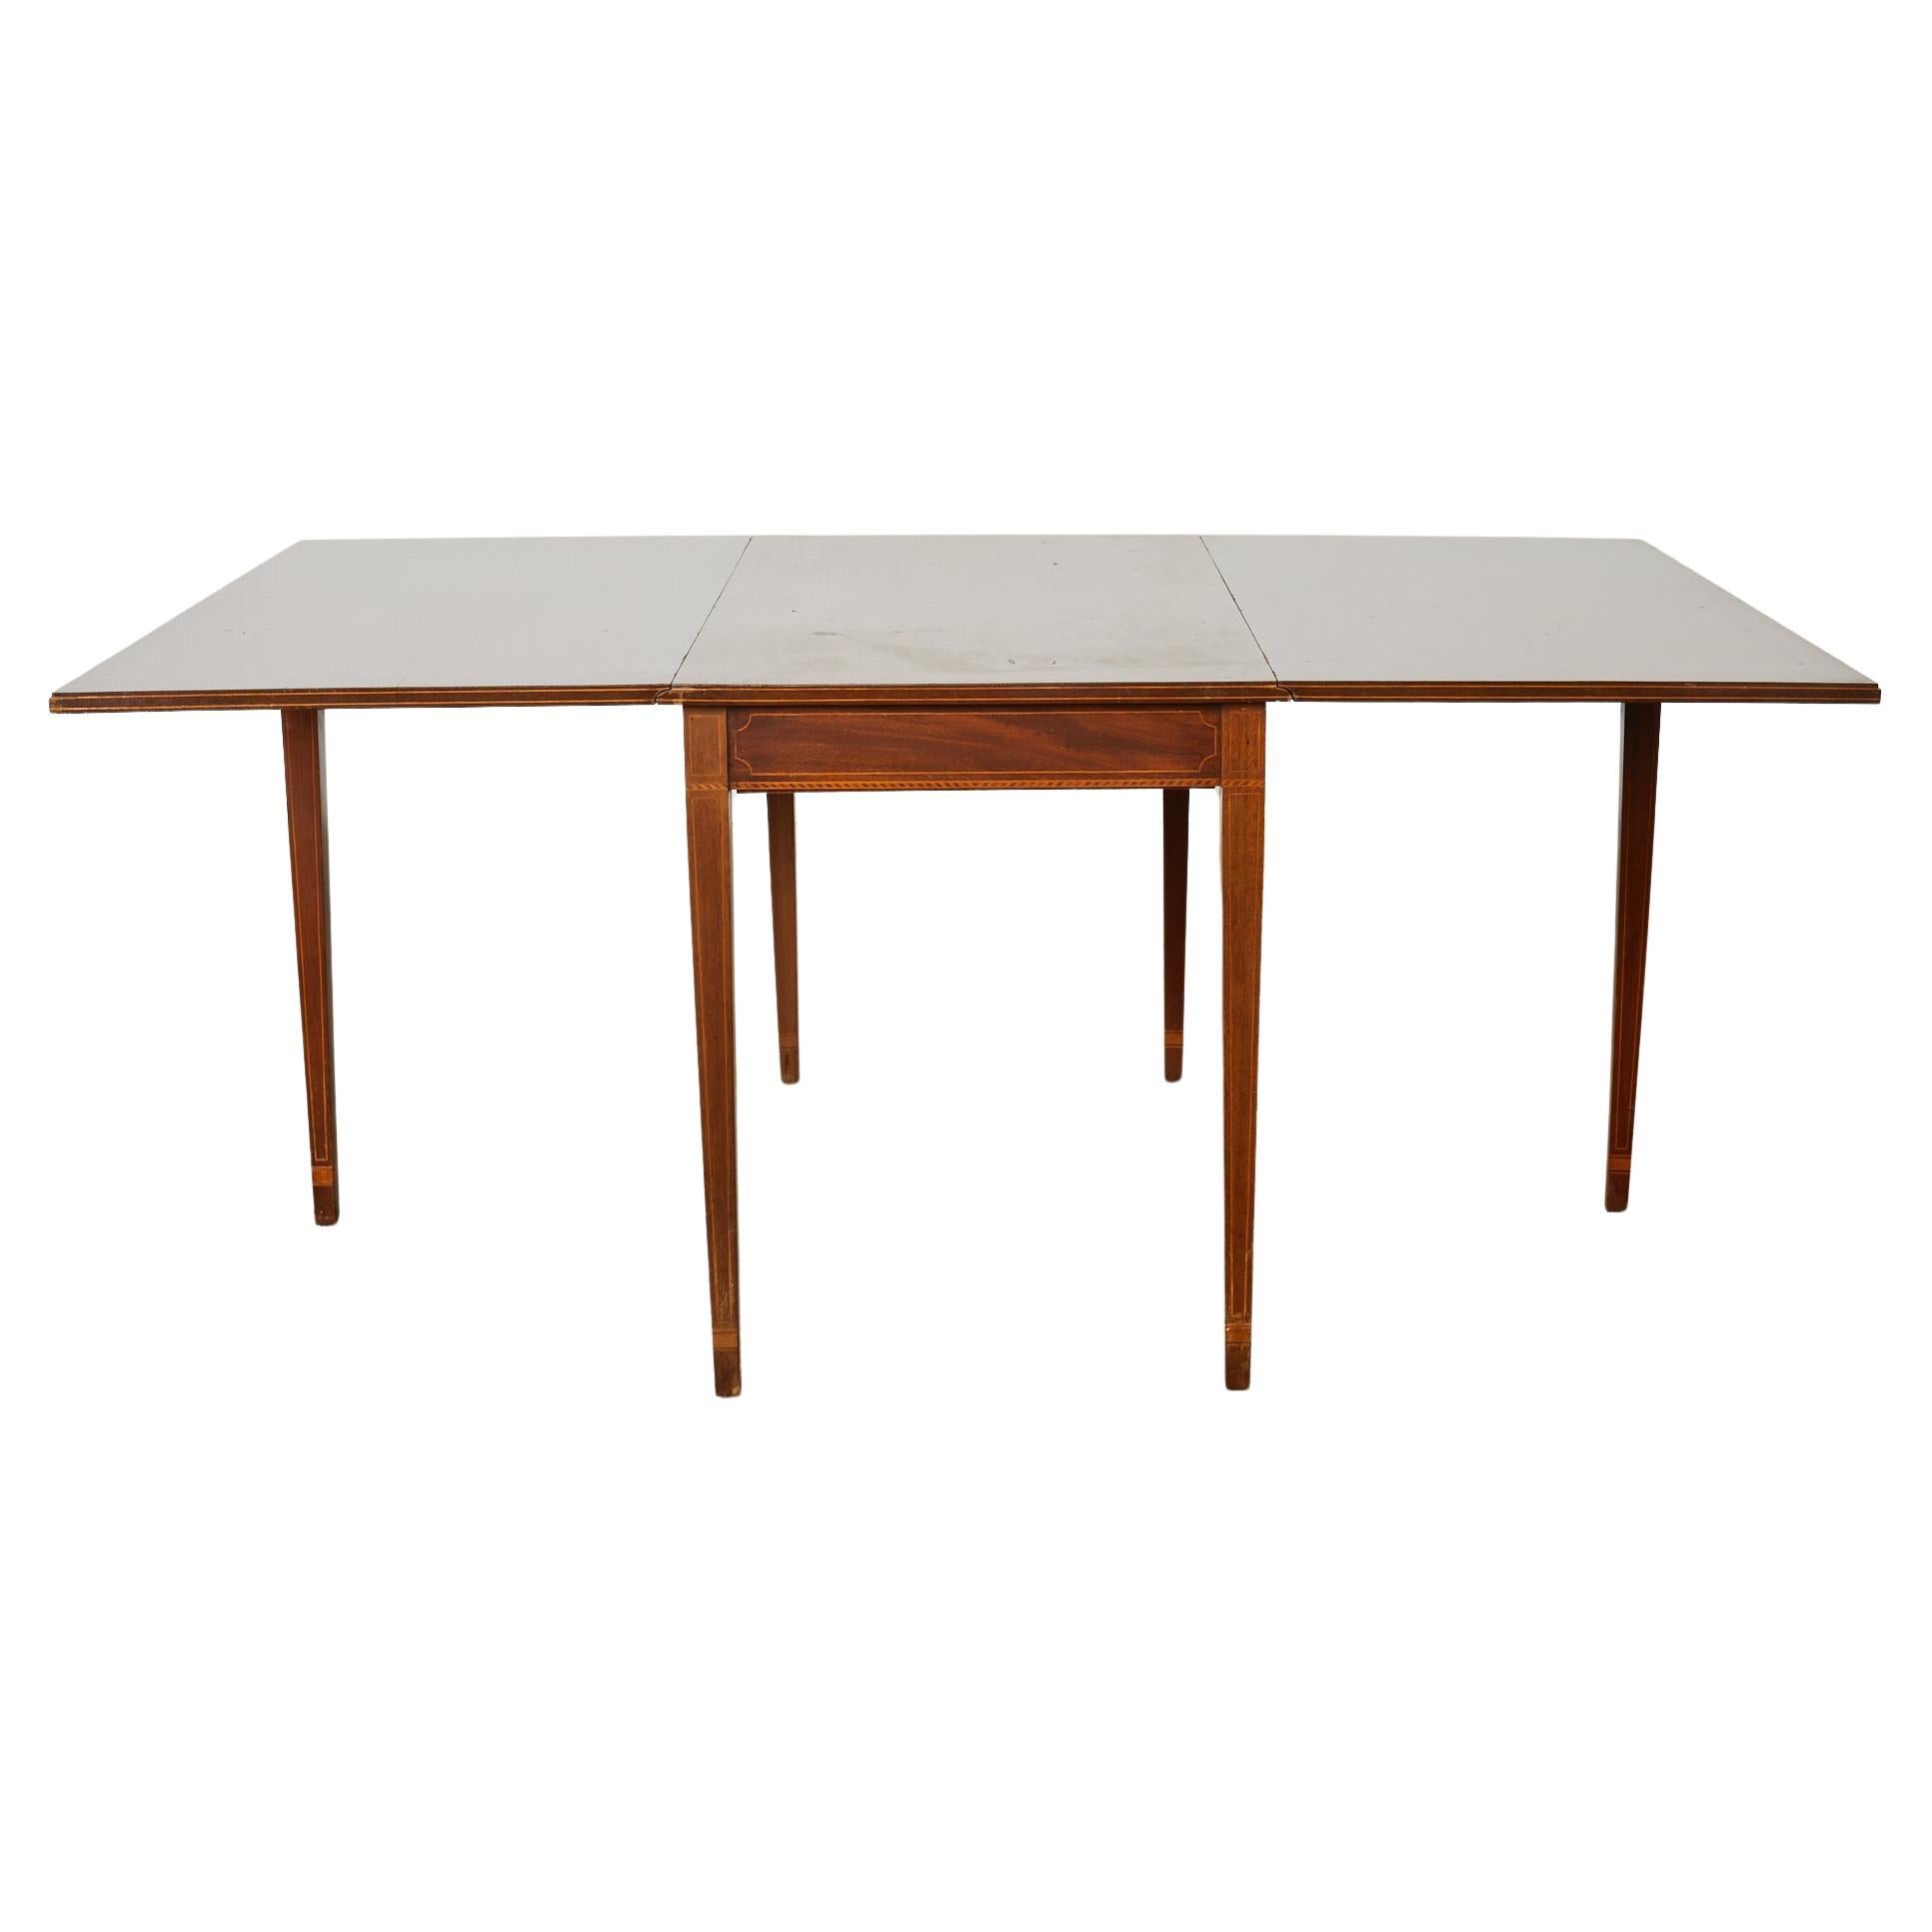 19th Century Federal Style Mahogany Drop Leaf Dining Table For Sale